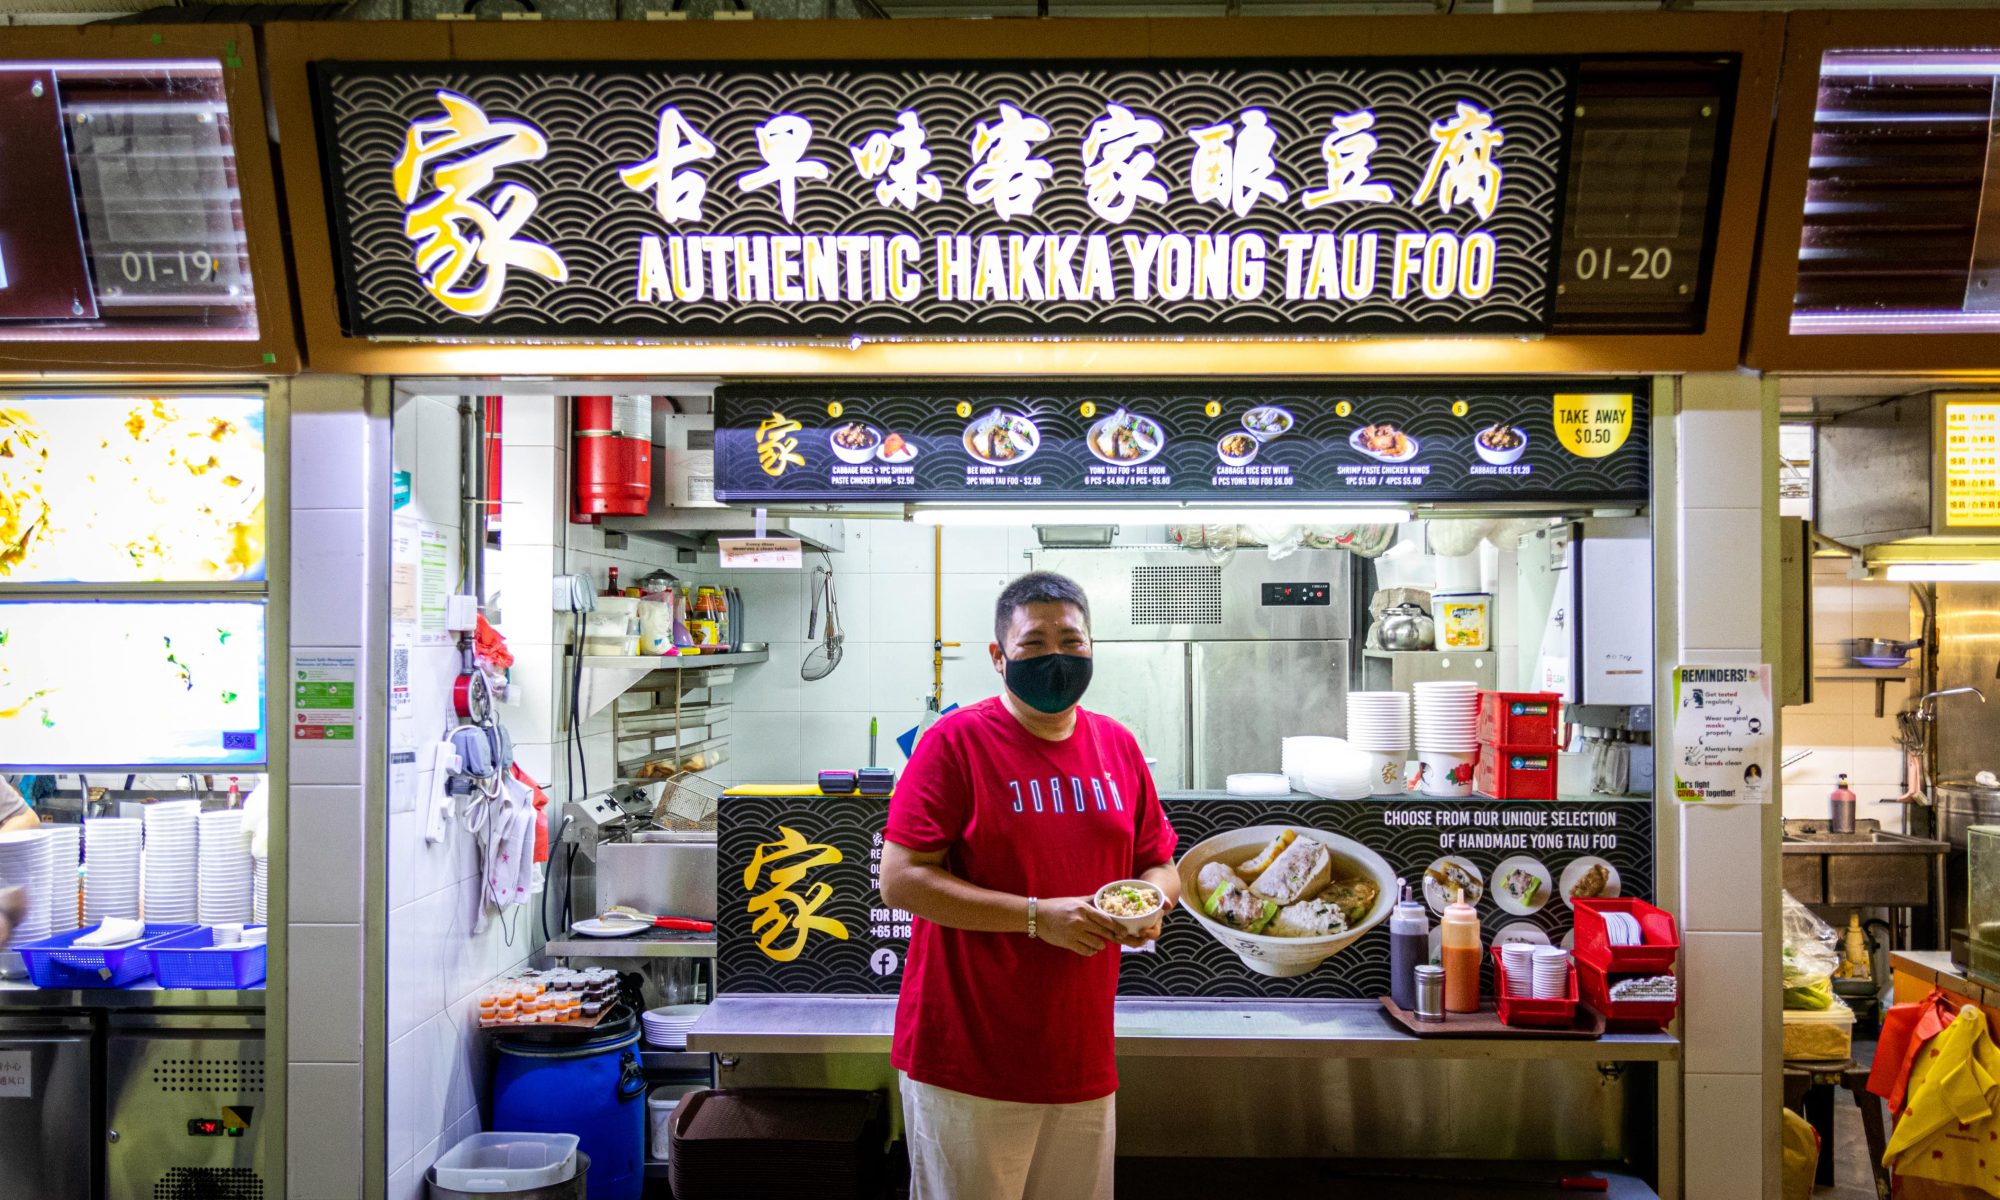 Owner of Jia Authentic Hakka Yong Tau Foo, available on WhyQ for delivery.